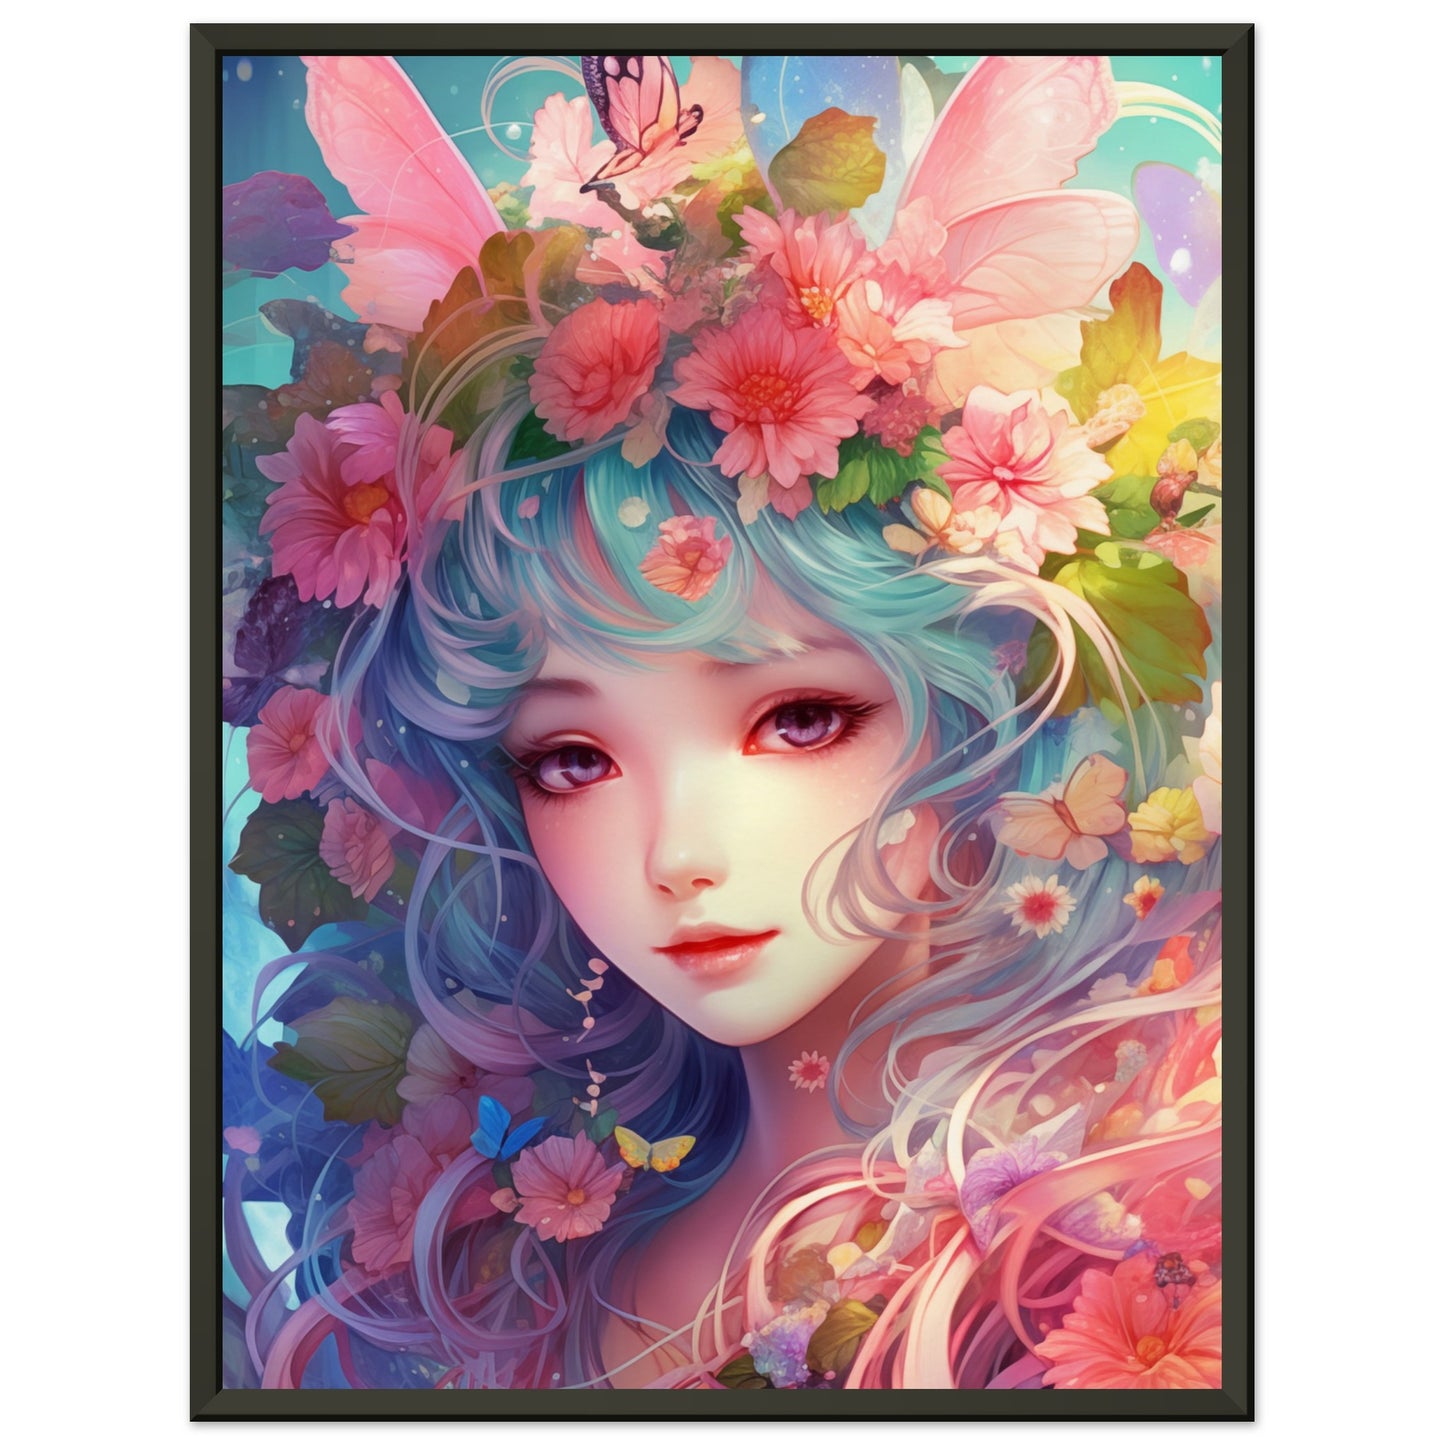 Blue Angel adorned with flowers | Wall art